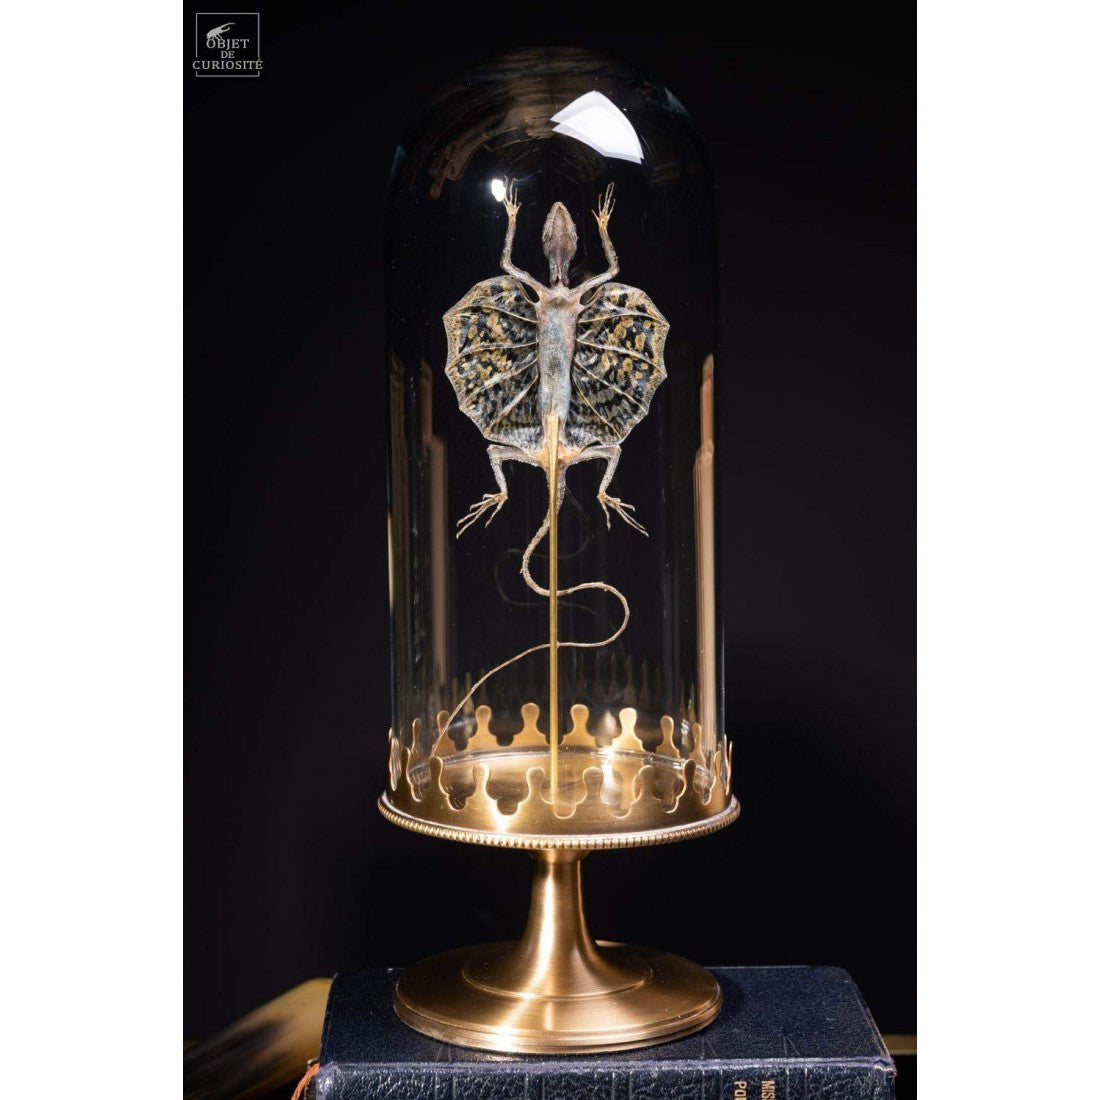 Flying lizard under glass with brass base